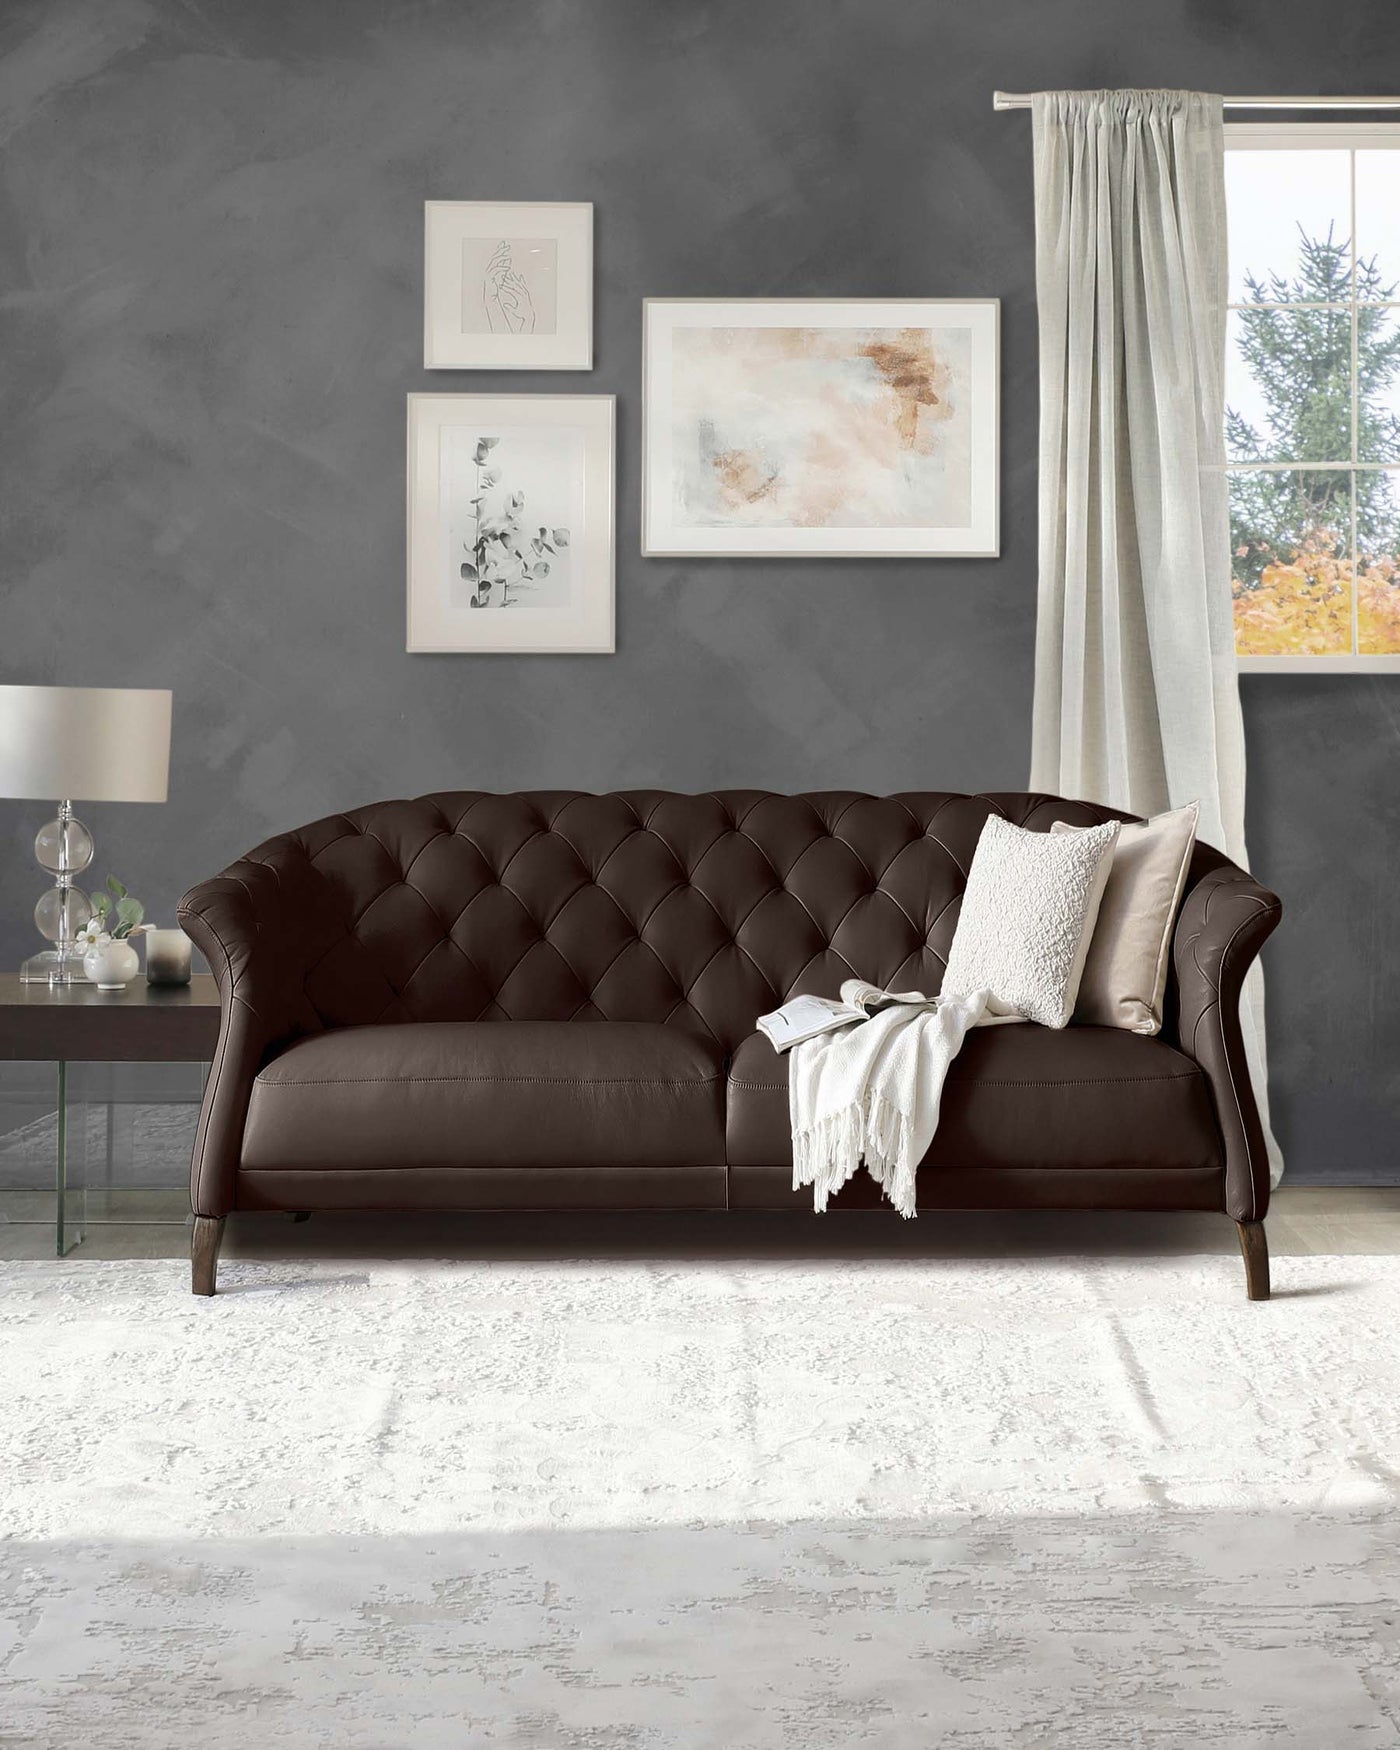 Elegant chocolate brown leather upholstered sofa with a classic tufted backrest and sleek curved armrests. Accompanied by soft white accent pillows and a fringe throw blanket, resting on a distressed white area rug. A glass-top side table with a modern table lamp is positioned to the left.